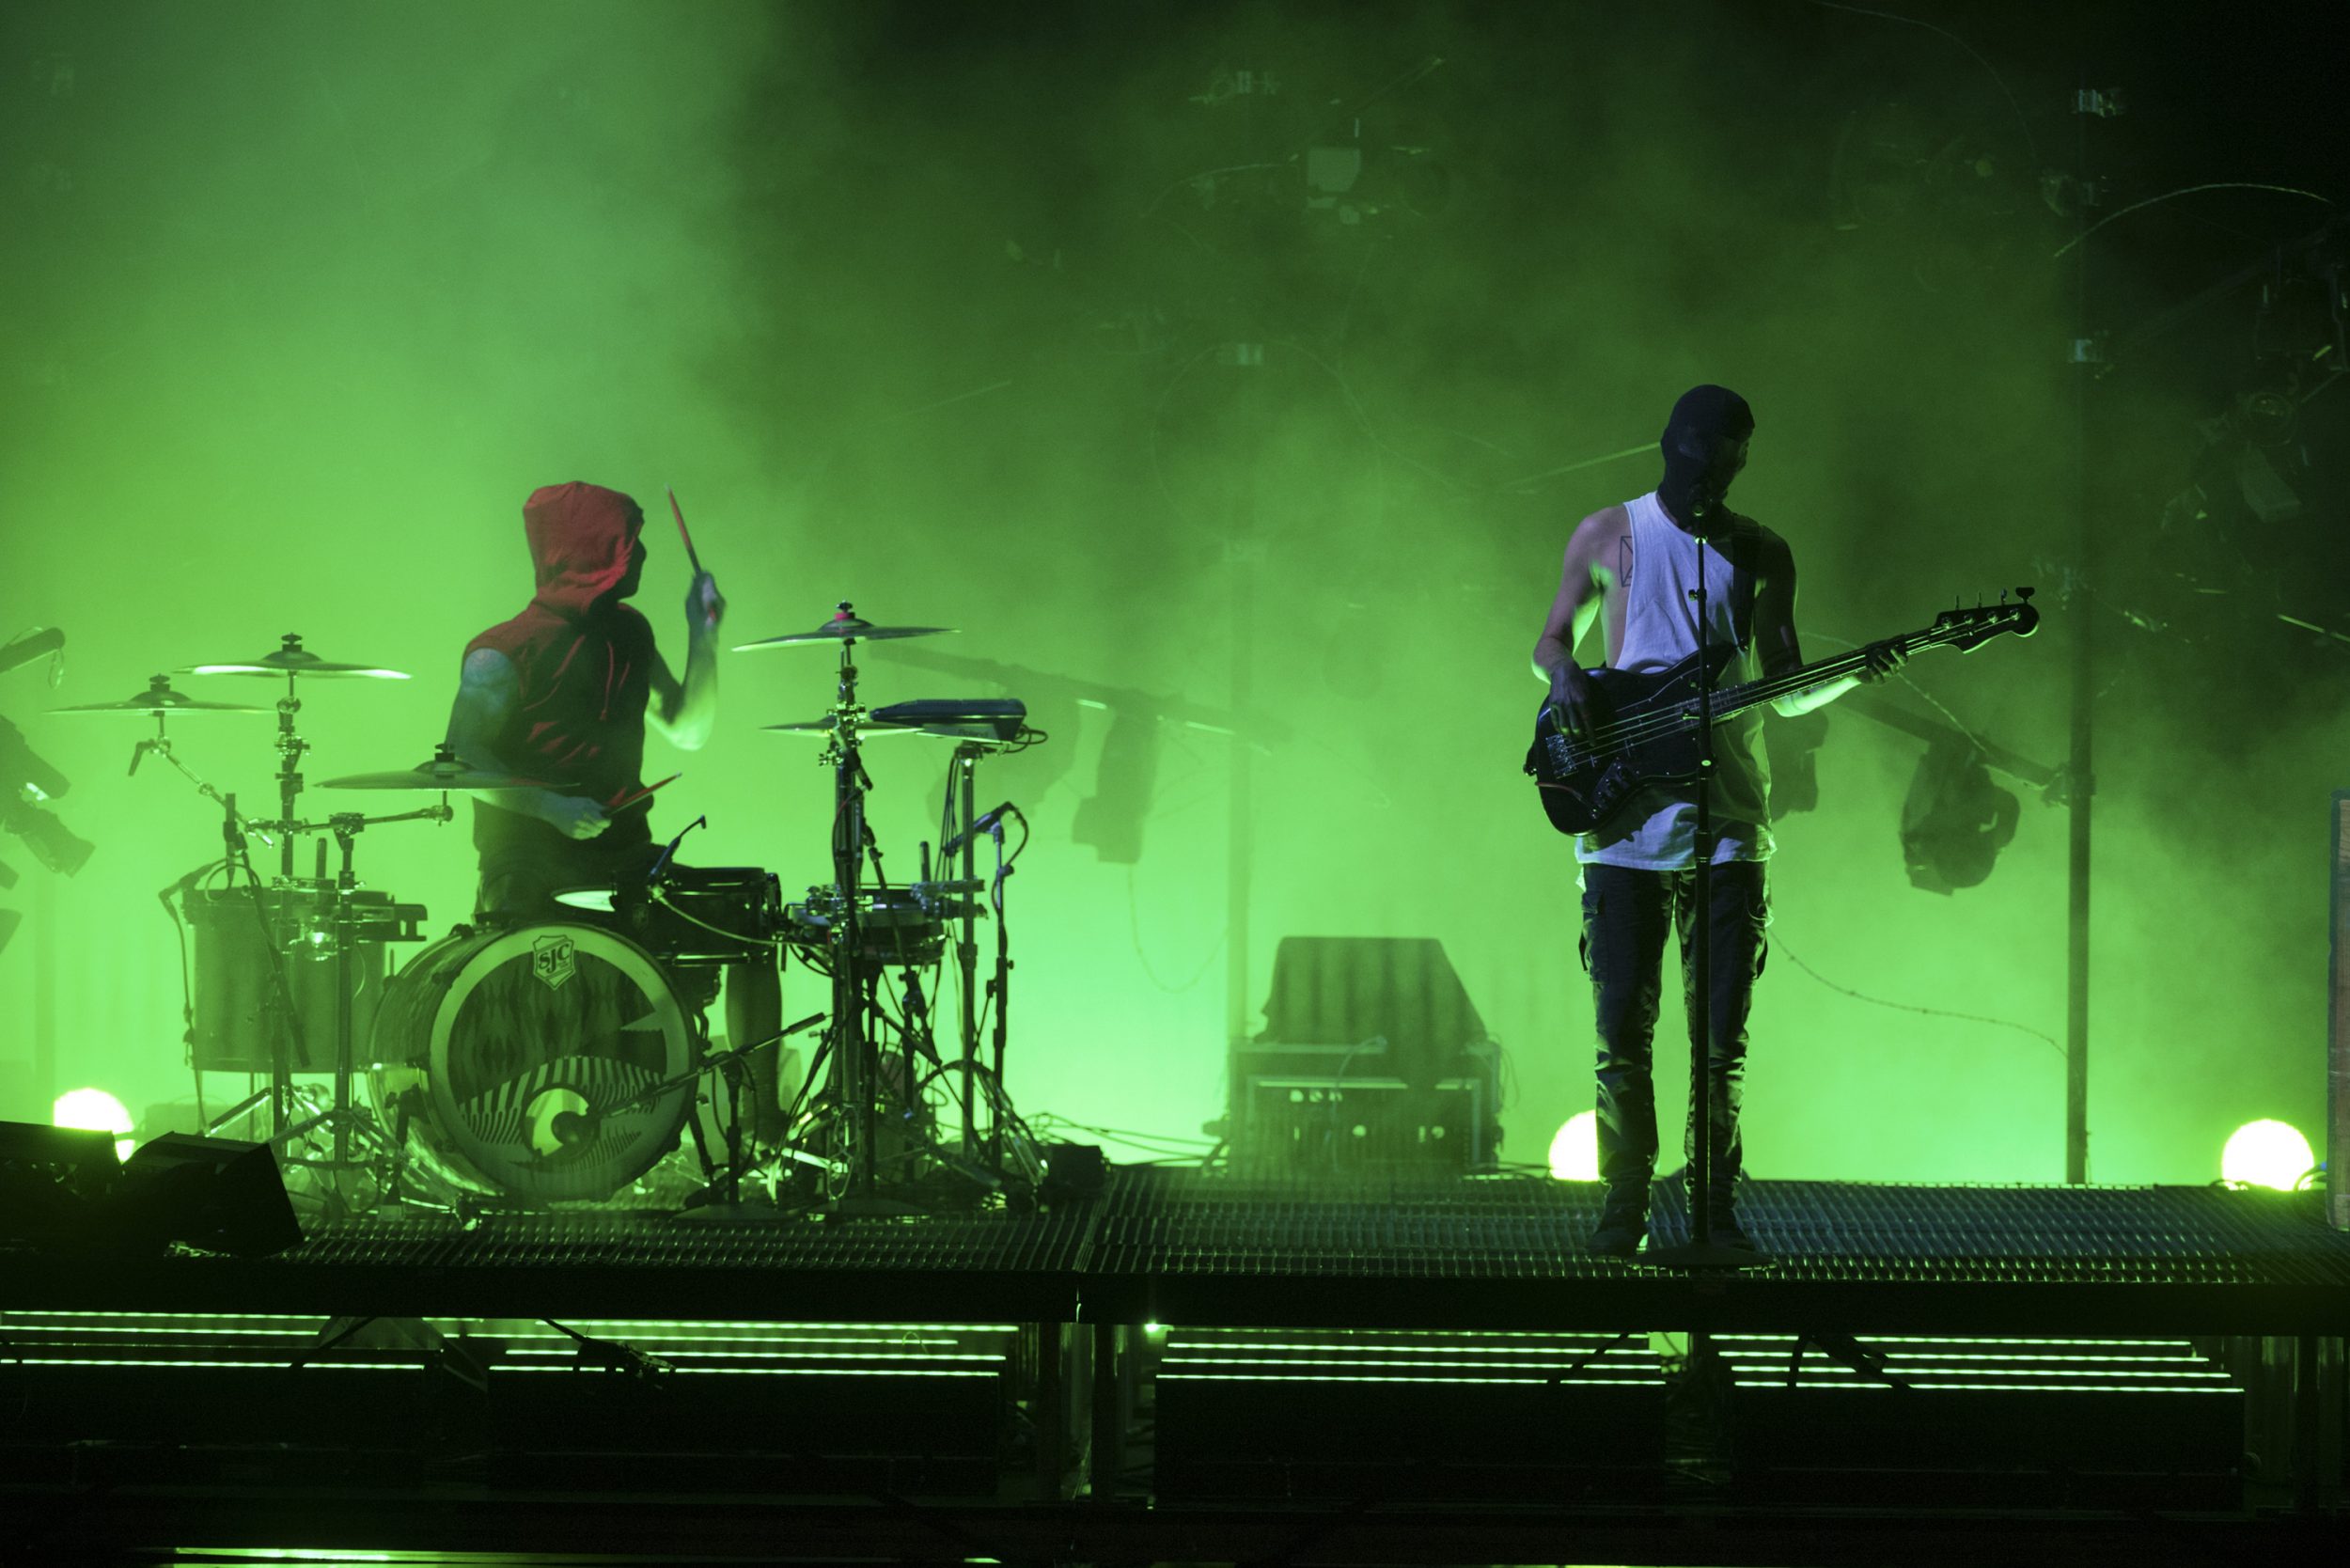 THE 2016 AMERICAN MUSIC AWARDS(r) - The “2016 American Music Awards,” the world’s biggest fan-voted award show, broadcasts live from the Microsoft Theater in Los Angeles on SUNDAY, NOVEMBER 20, at 8:00 p.m. EST, on ABC. (Image Group LA/ABC) TWENTY ONE PILOTS